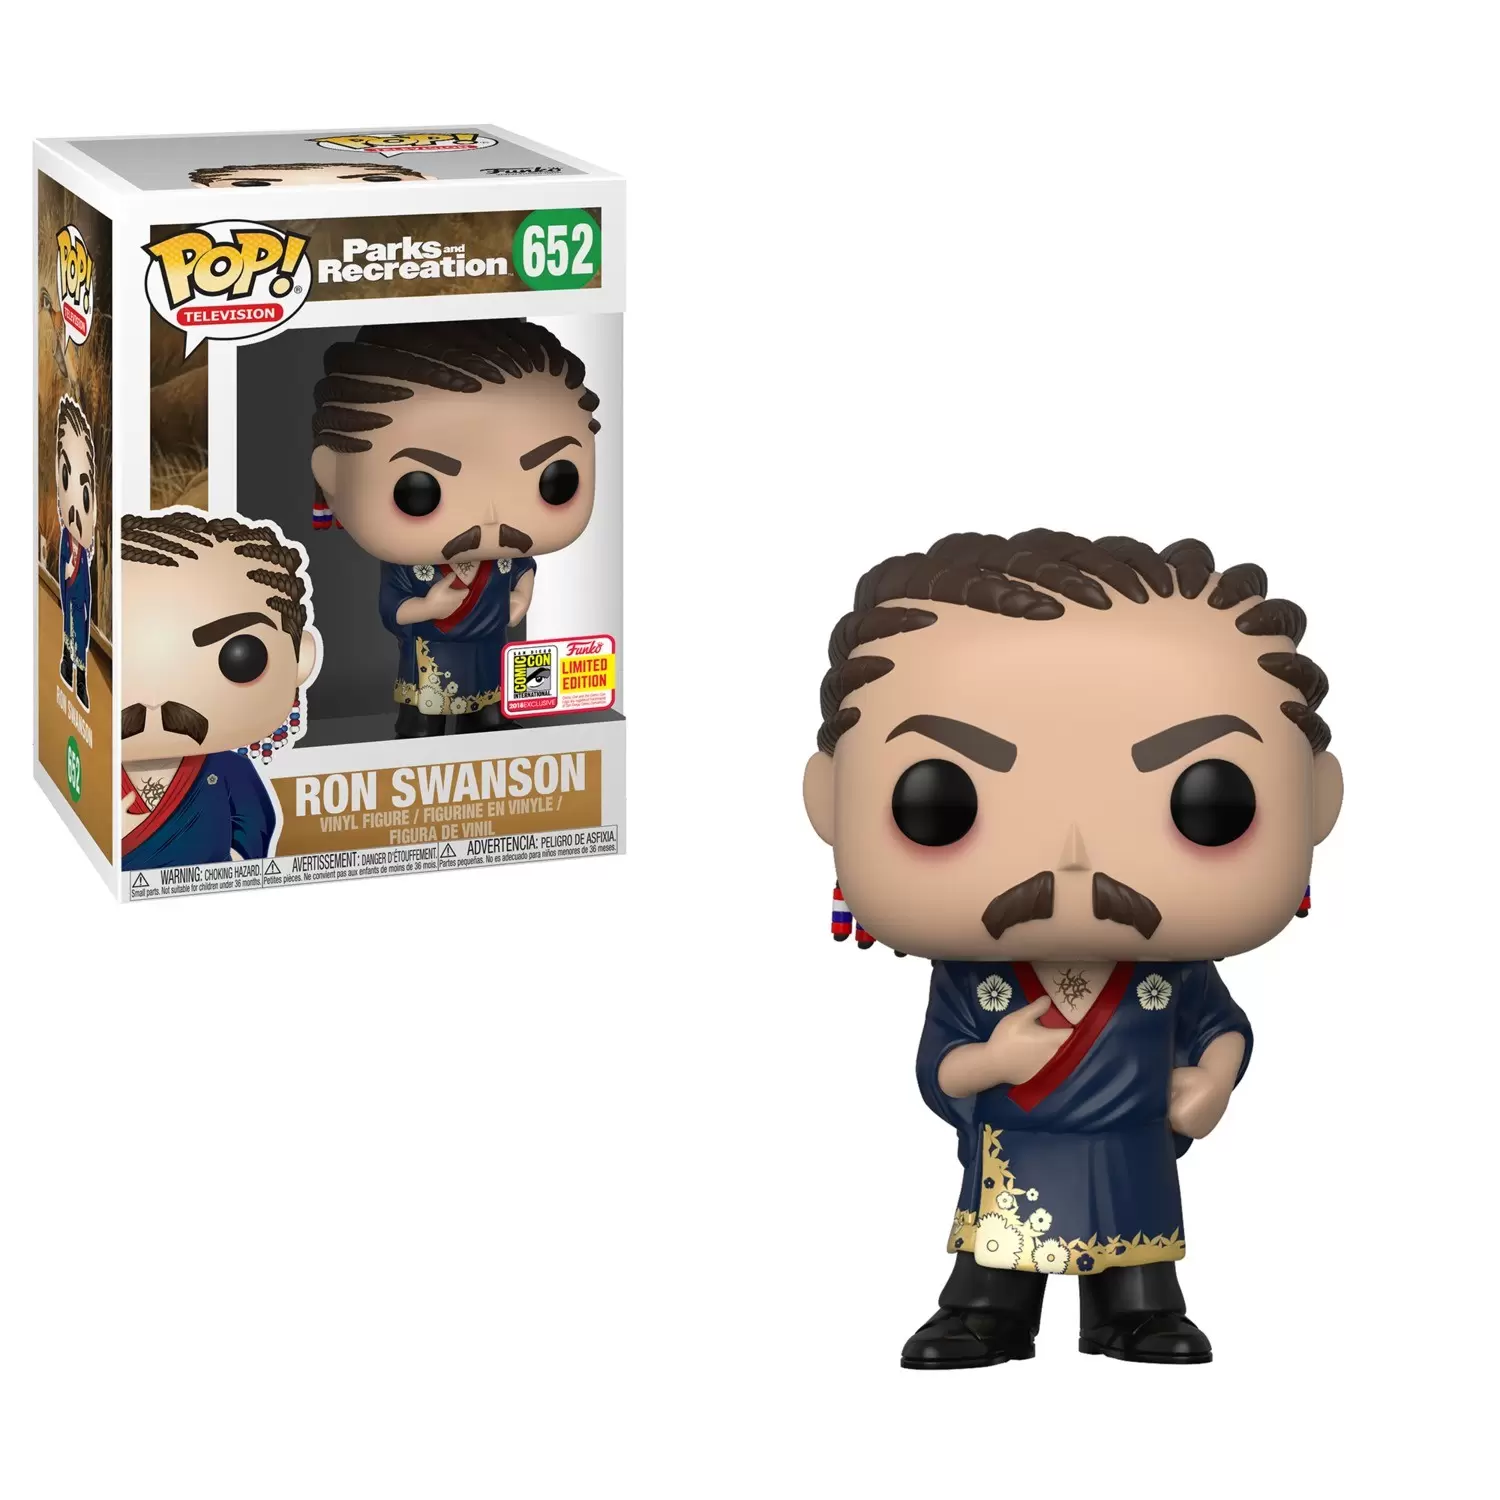 POP! Television - Parks and Recreation - Ron Swanson